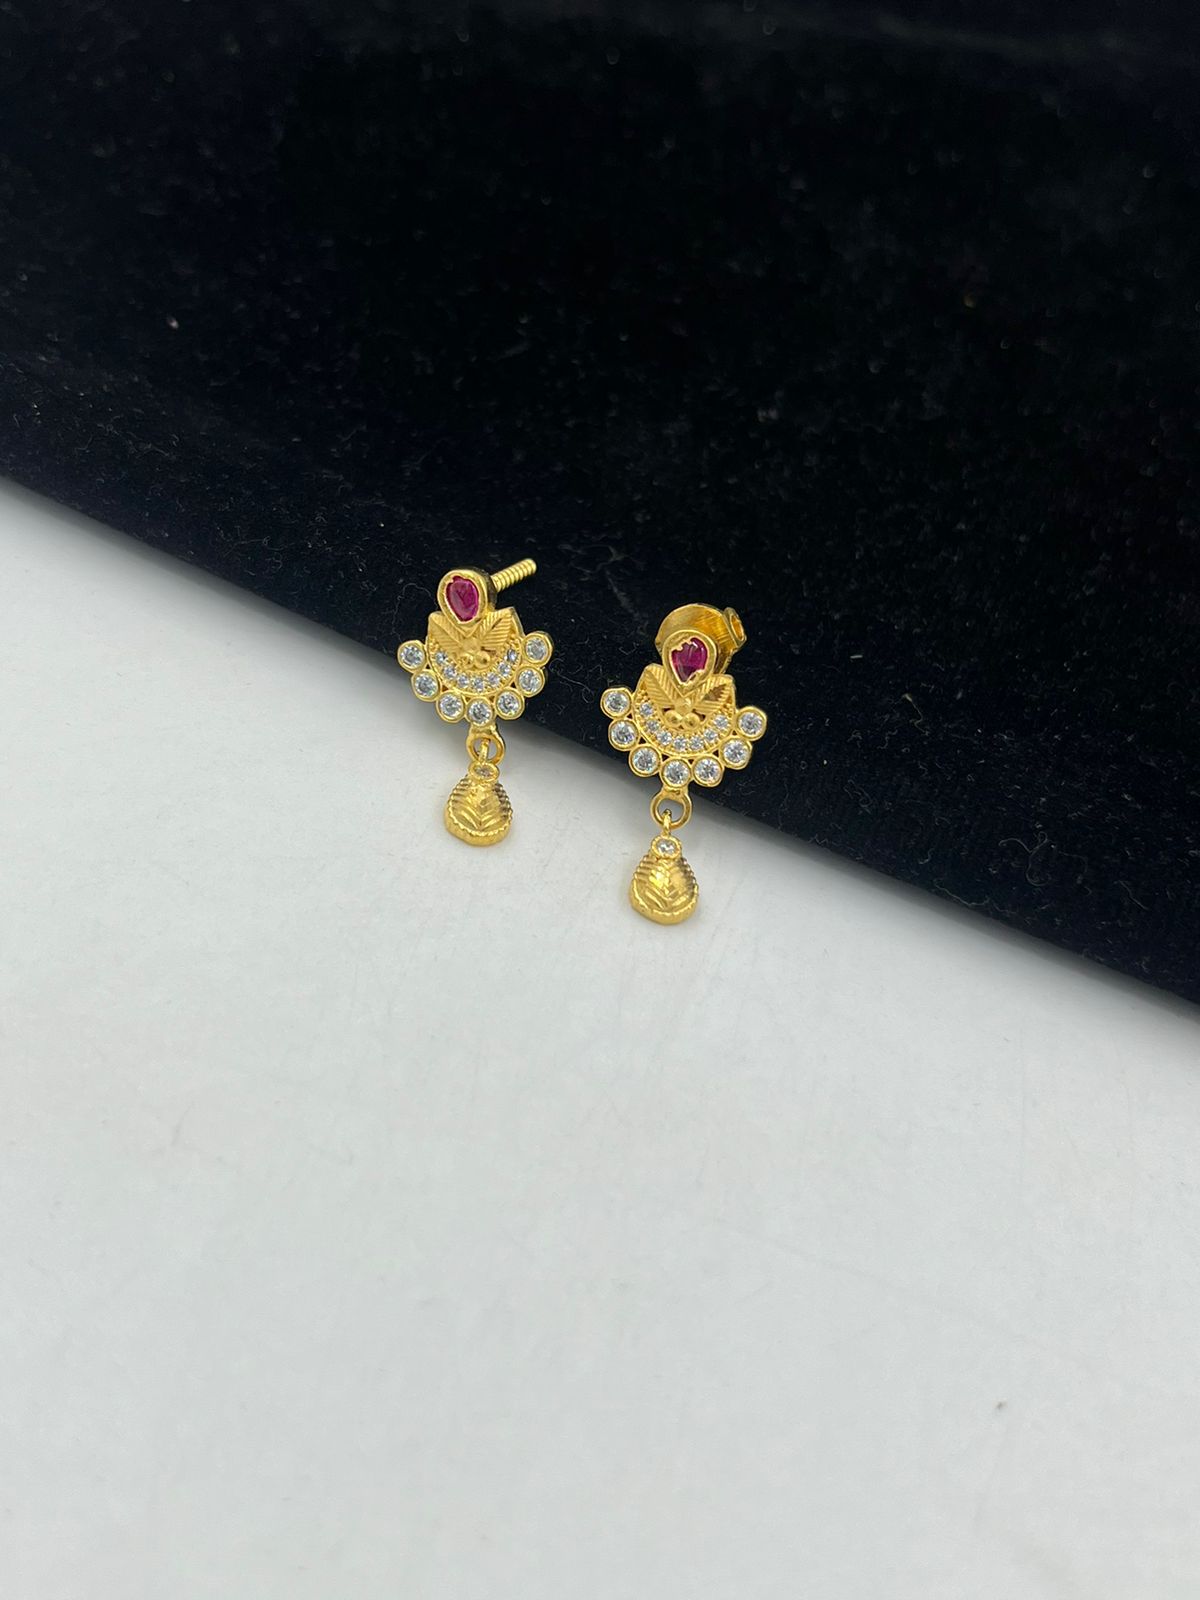 Buy Cute Gold Design One Gram Gold Covering Plain Stud Earring for Daily Use